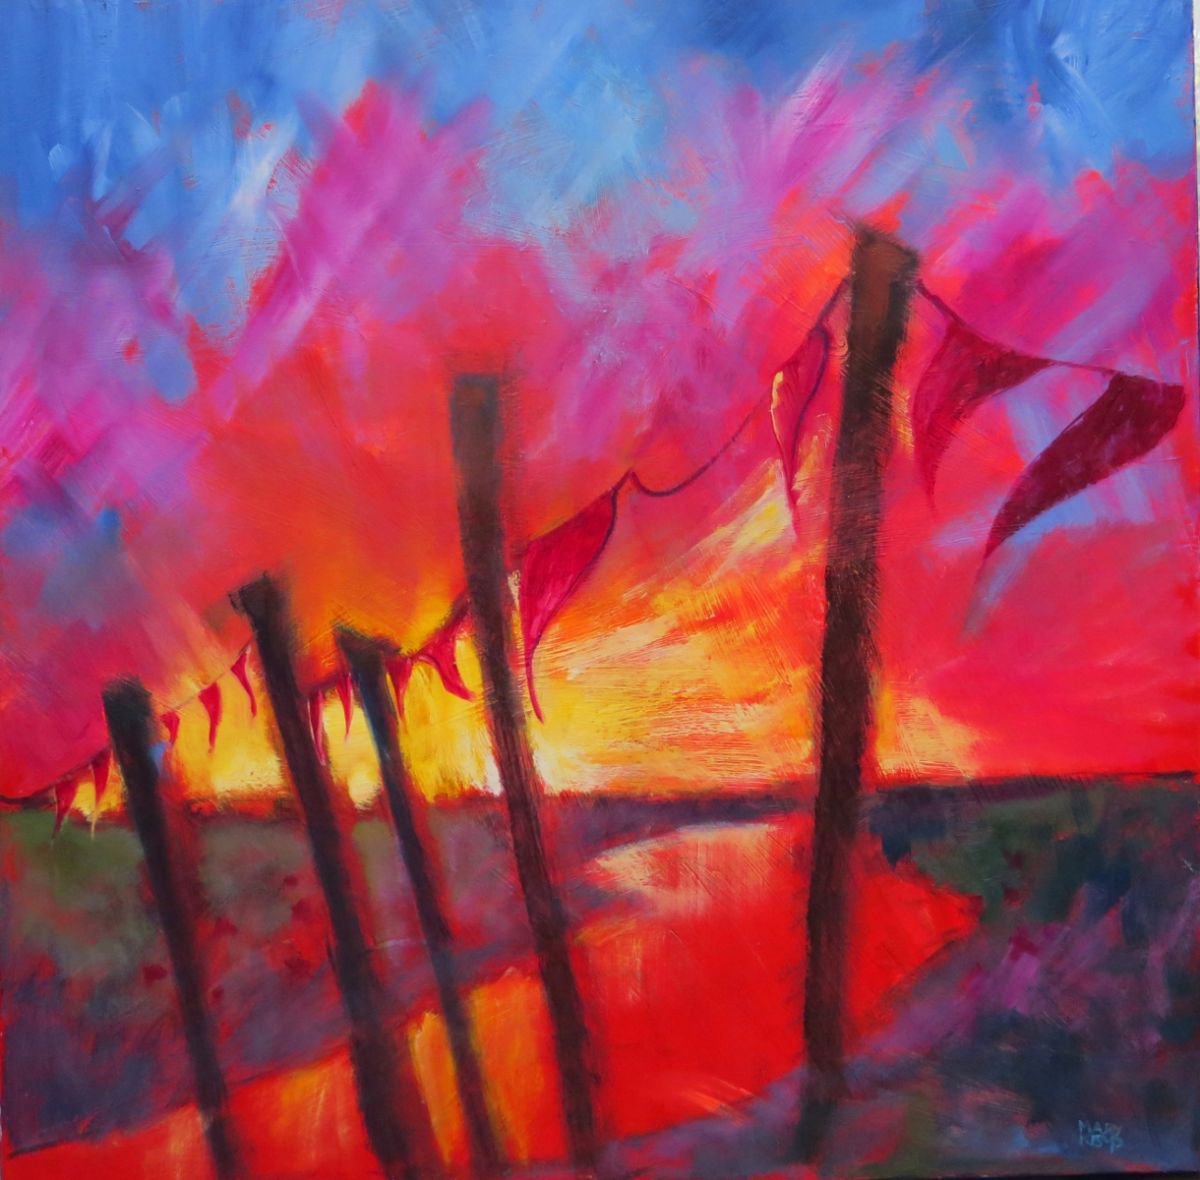 Flags at Sunset by Mary Kemp